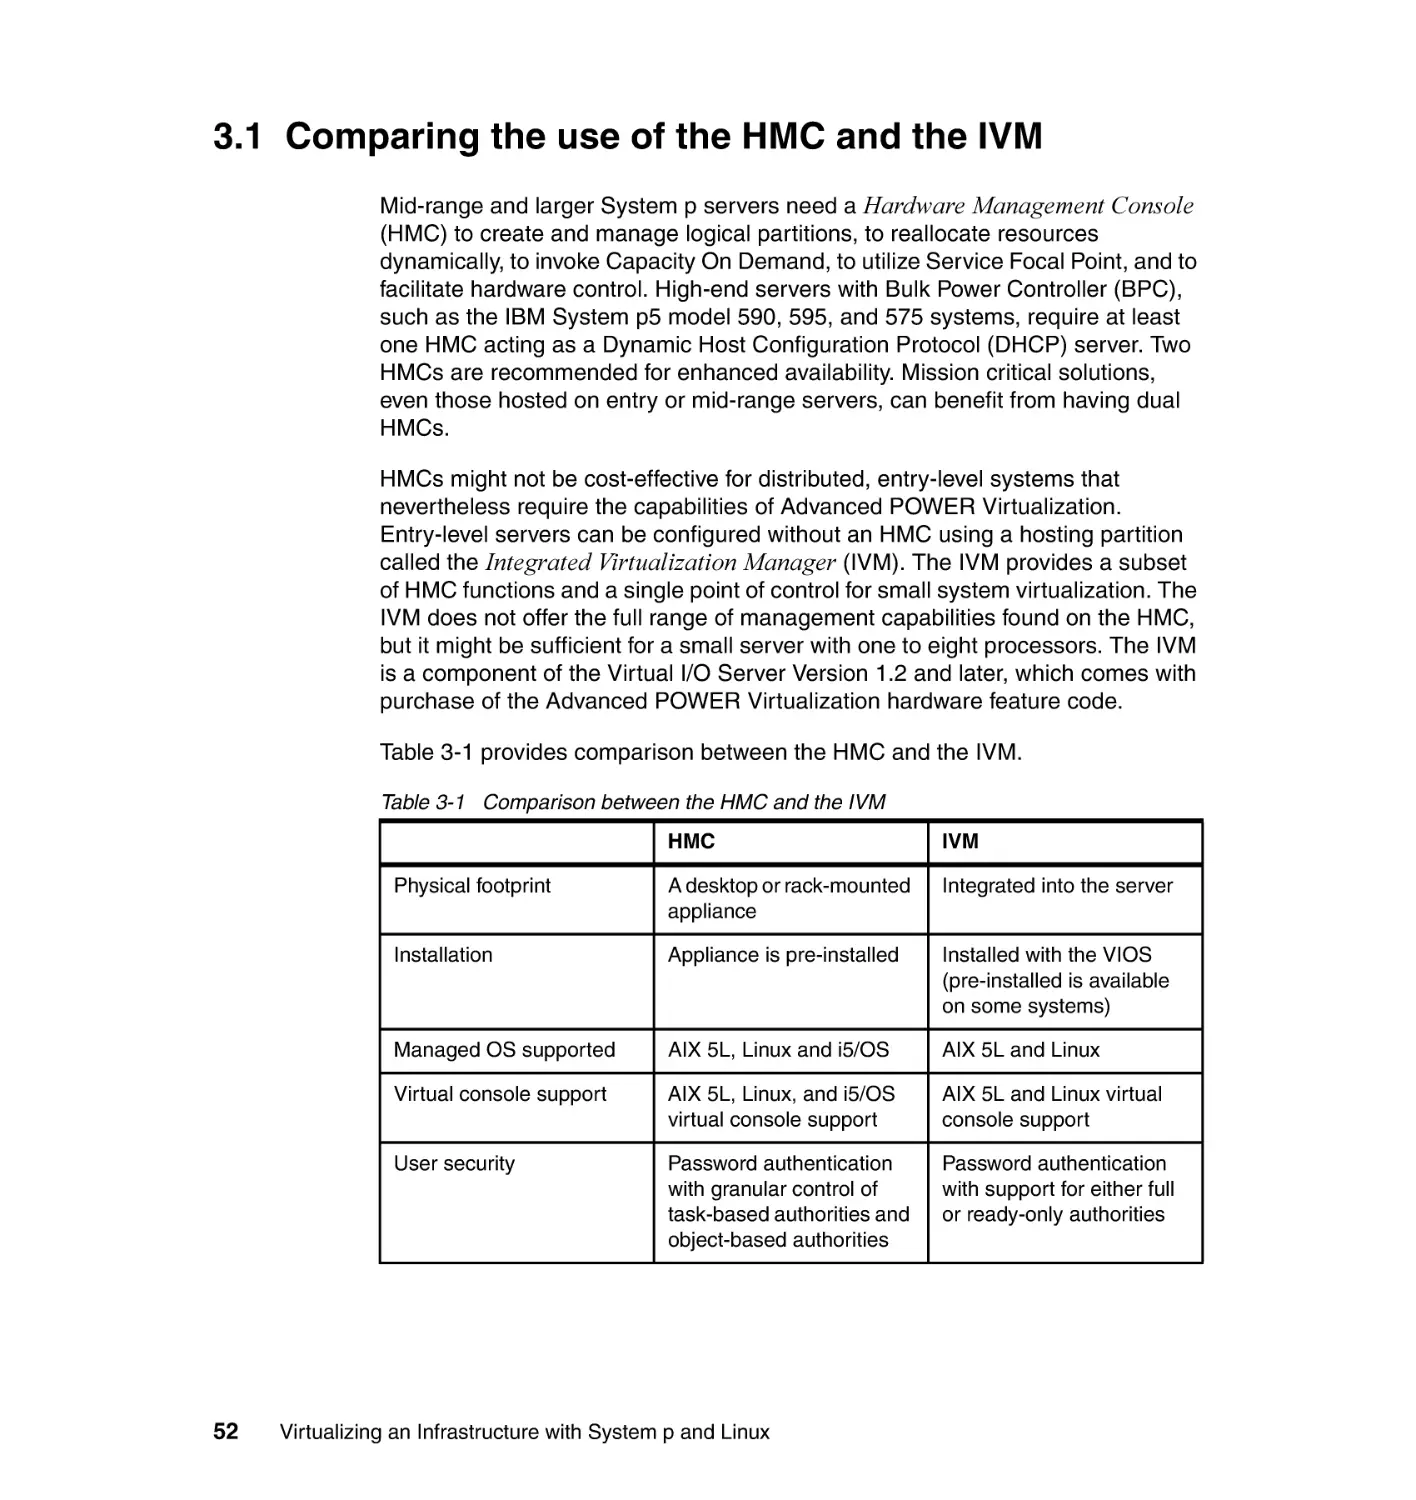 3.1 Comparing the use of the HMC and the IVM